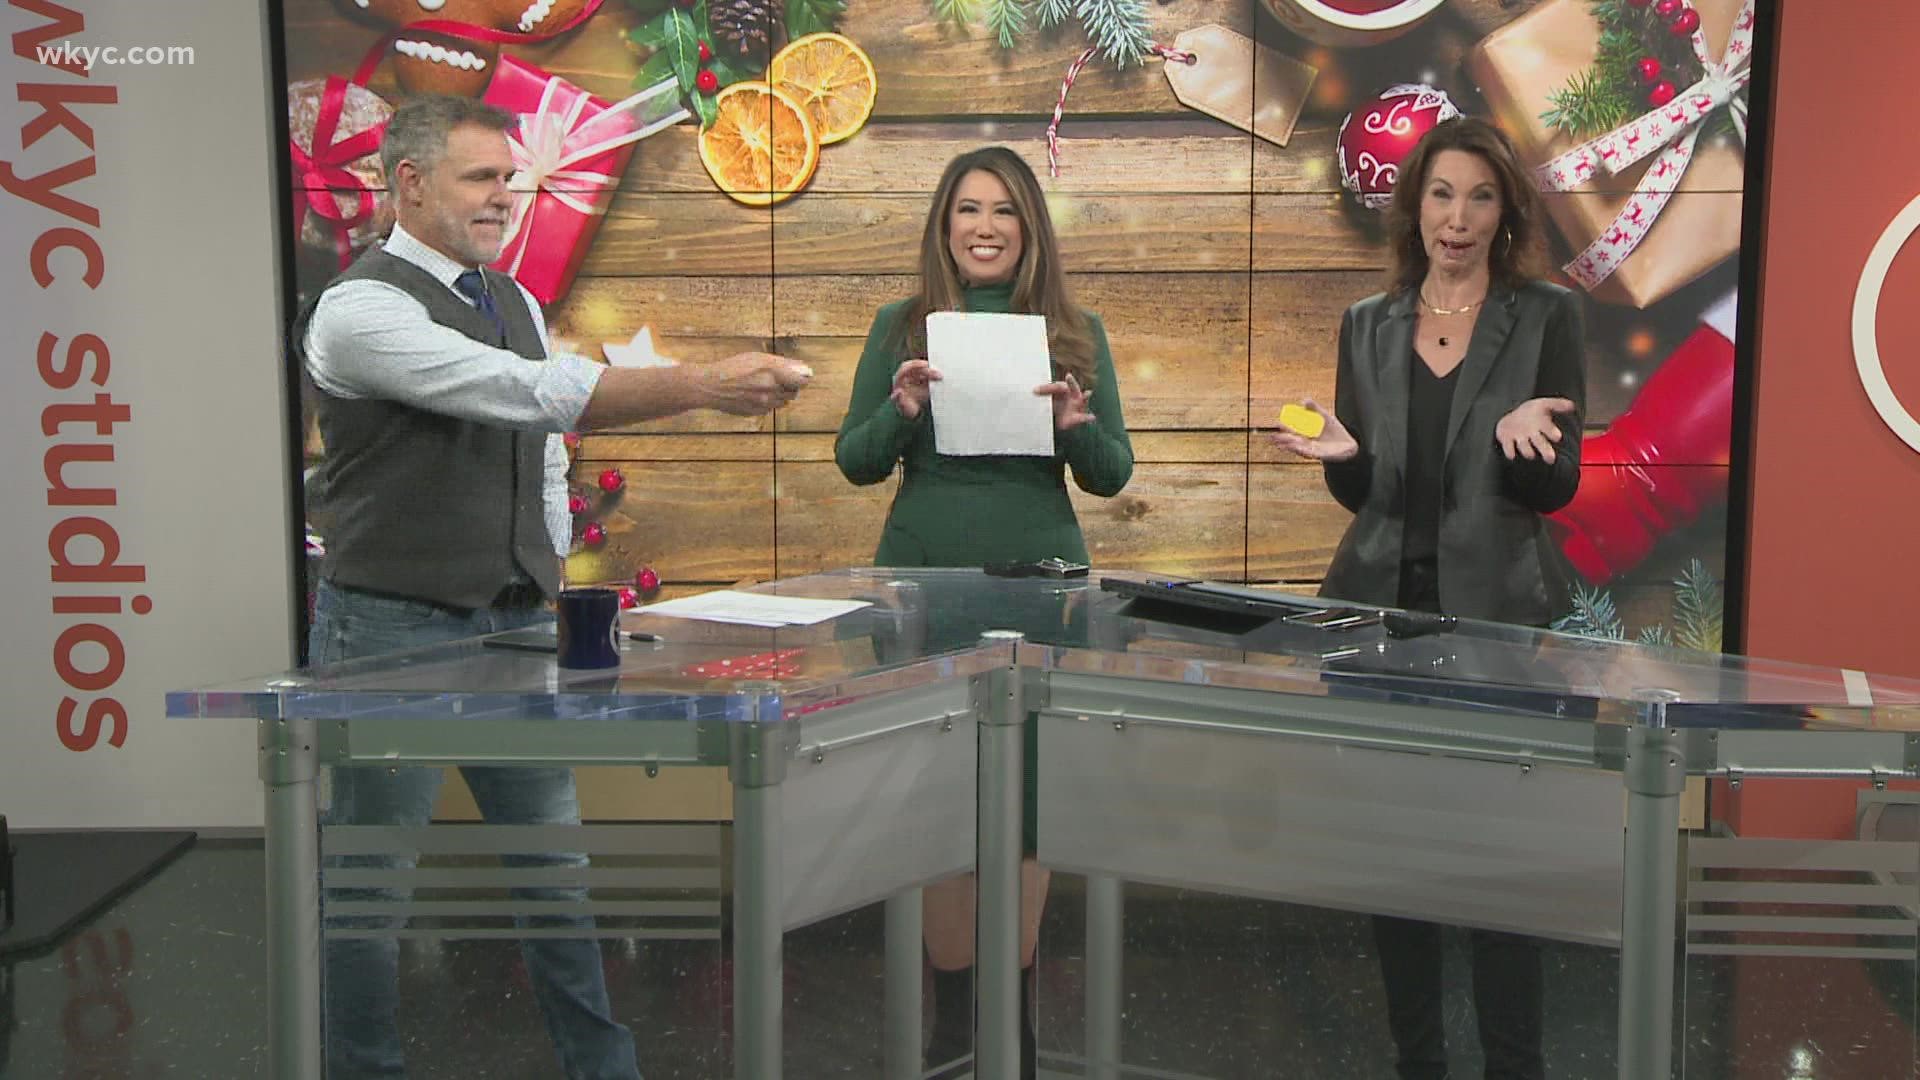 On this edition of Throwdown Thursday, Betsy Kling and Jay Crawford answer questions about the holidays.